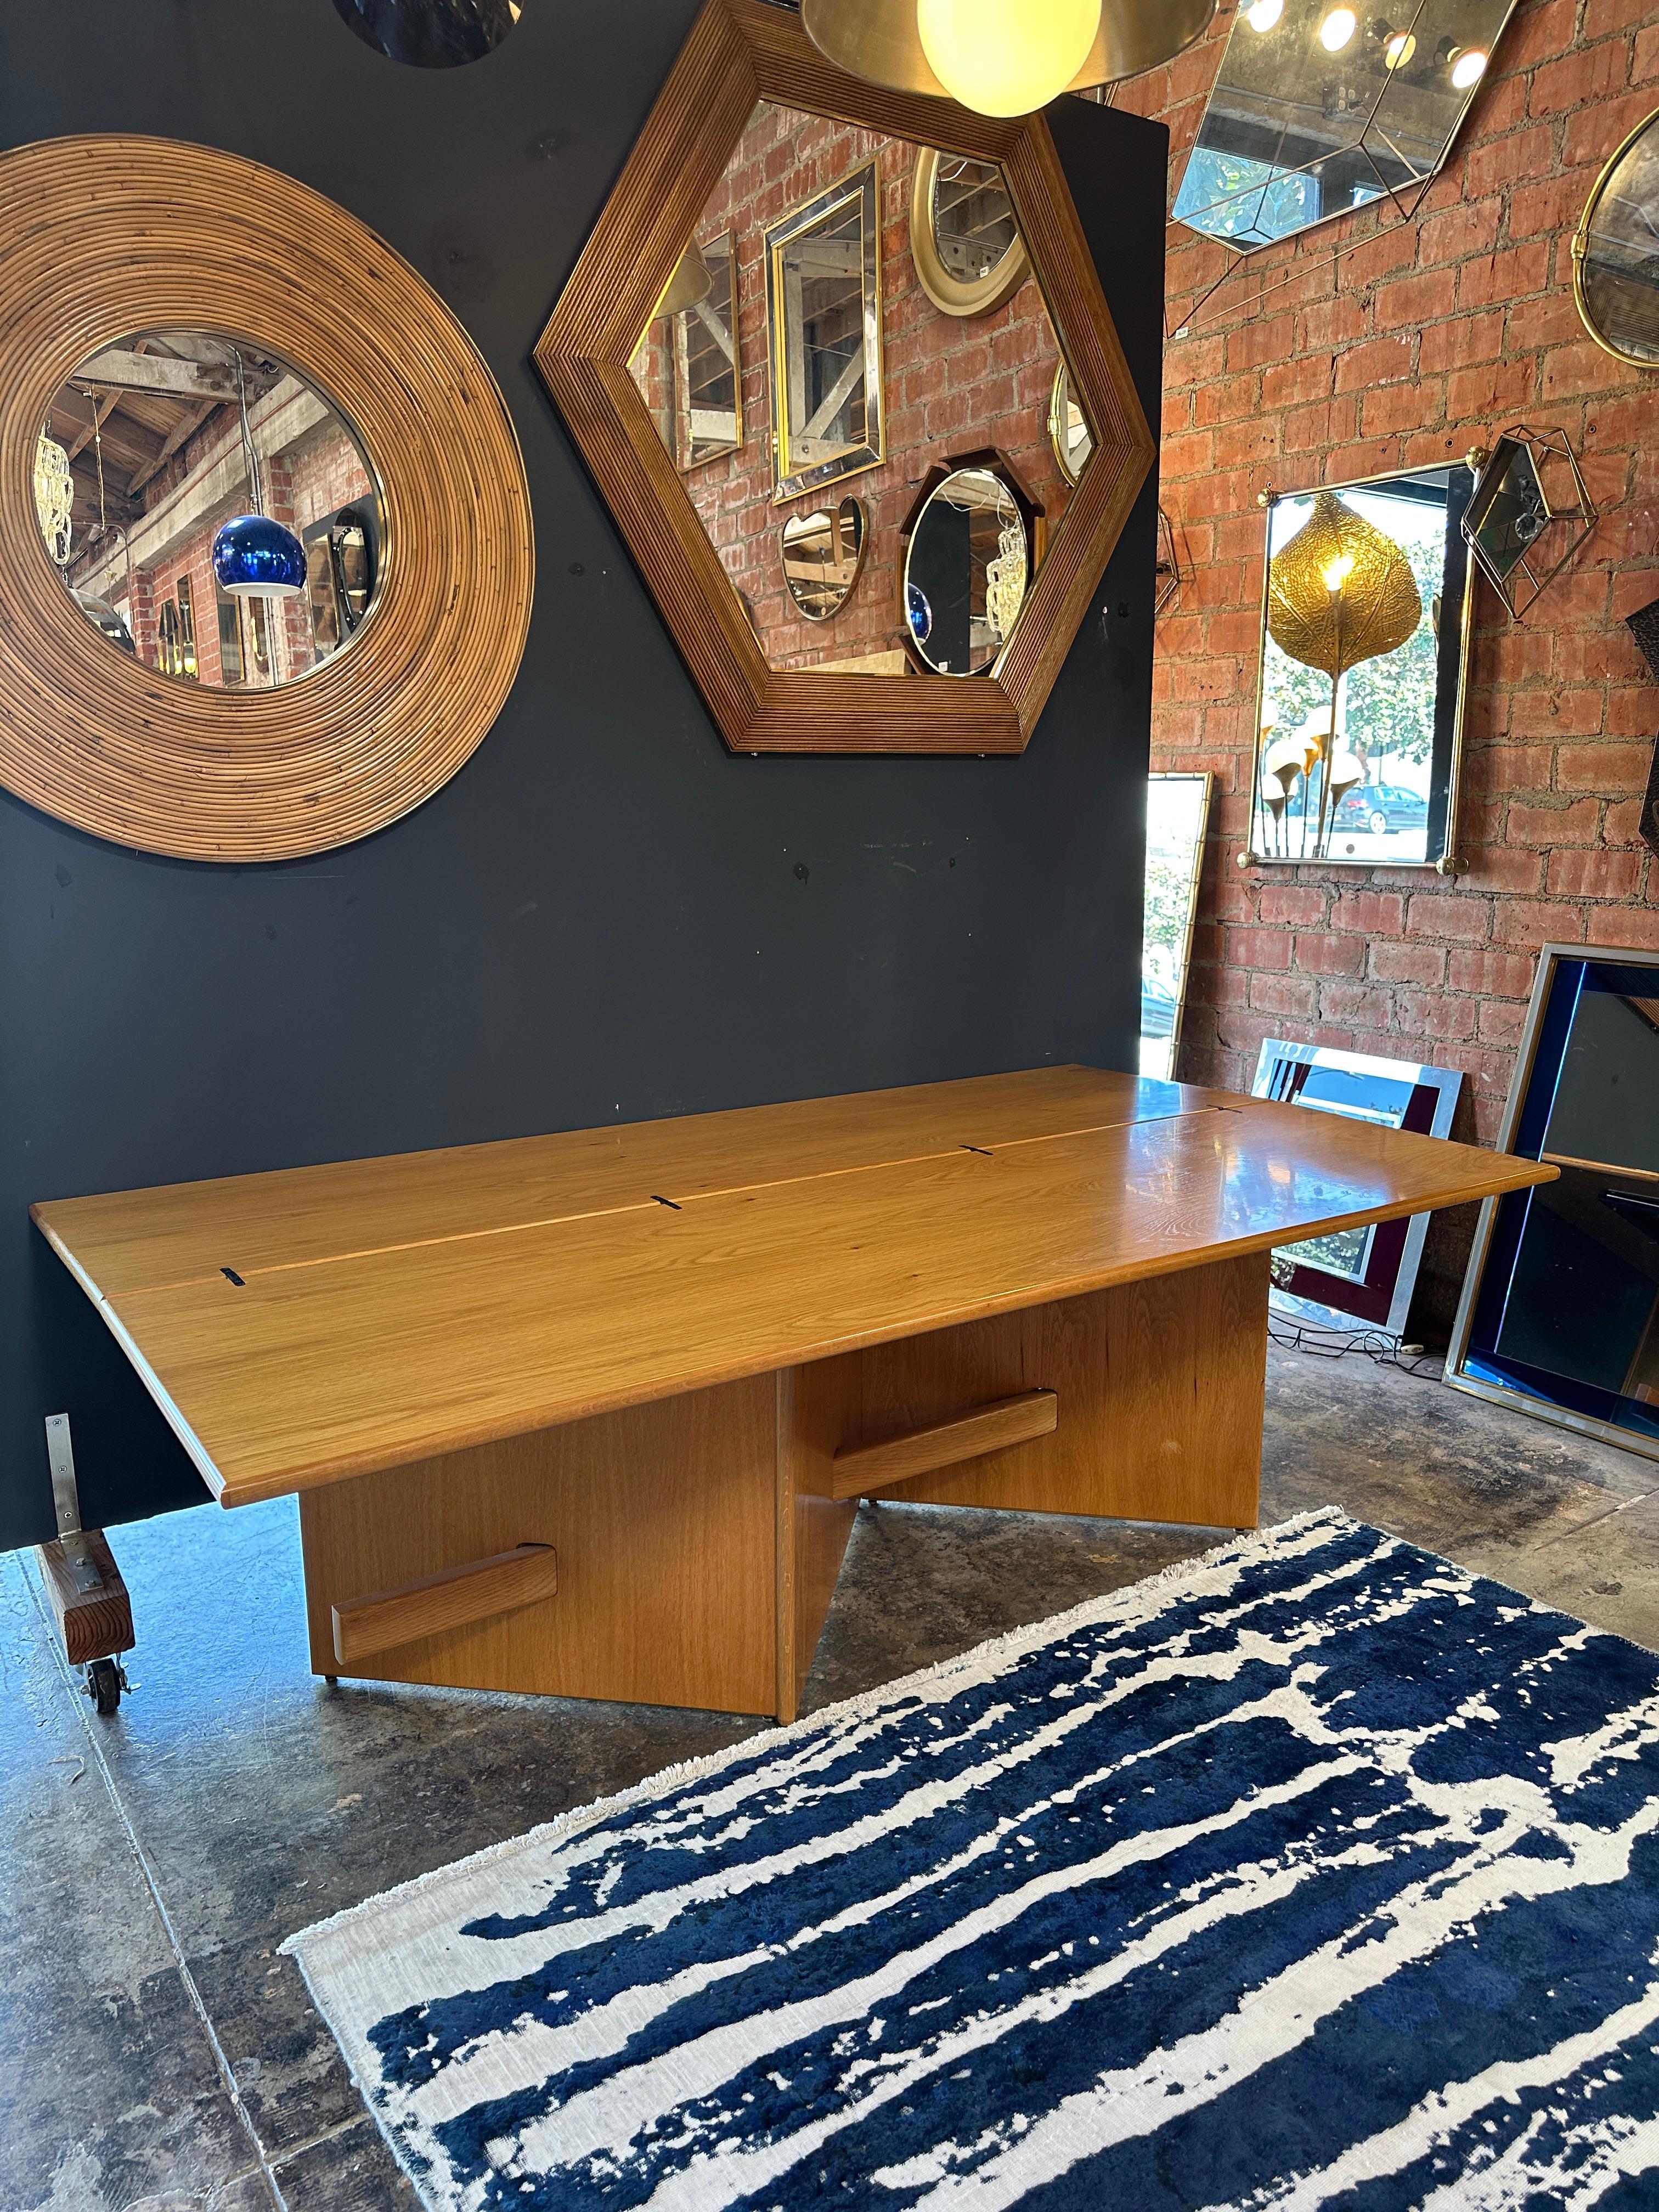 Experience versatility and elegance with our Elegant Italian Mid Century Adjustable Console/Table from the 1970s. This sophisticated piece seamlessly blends form and function, allowing you to adapt its stylish design to suit various spaces and